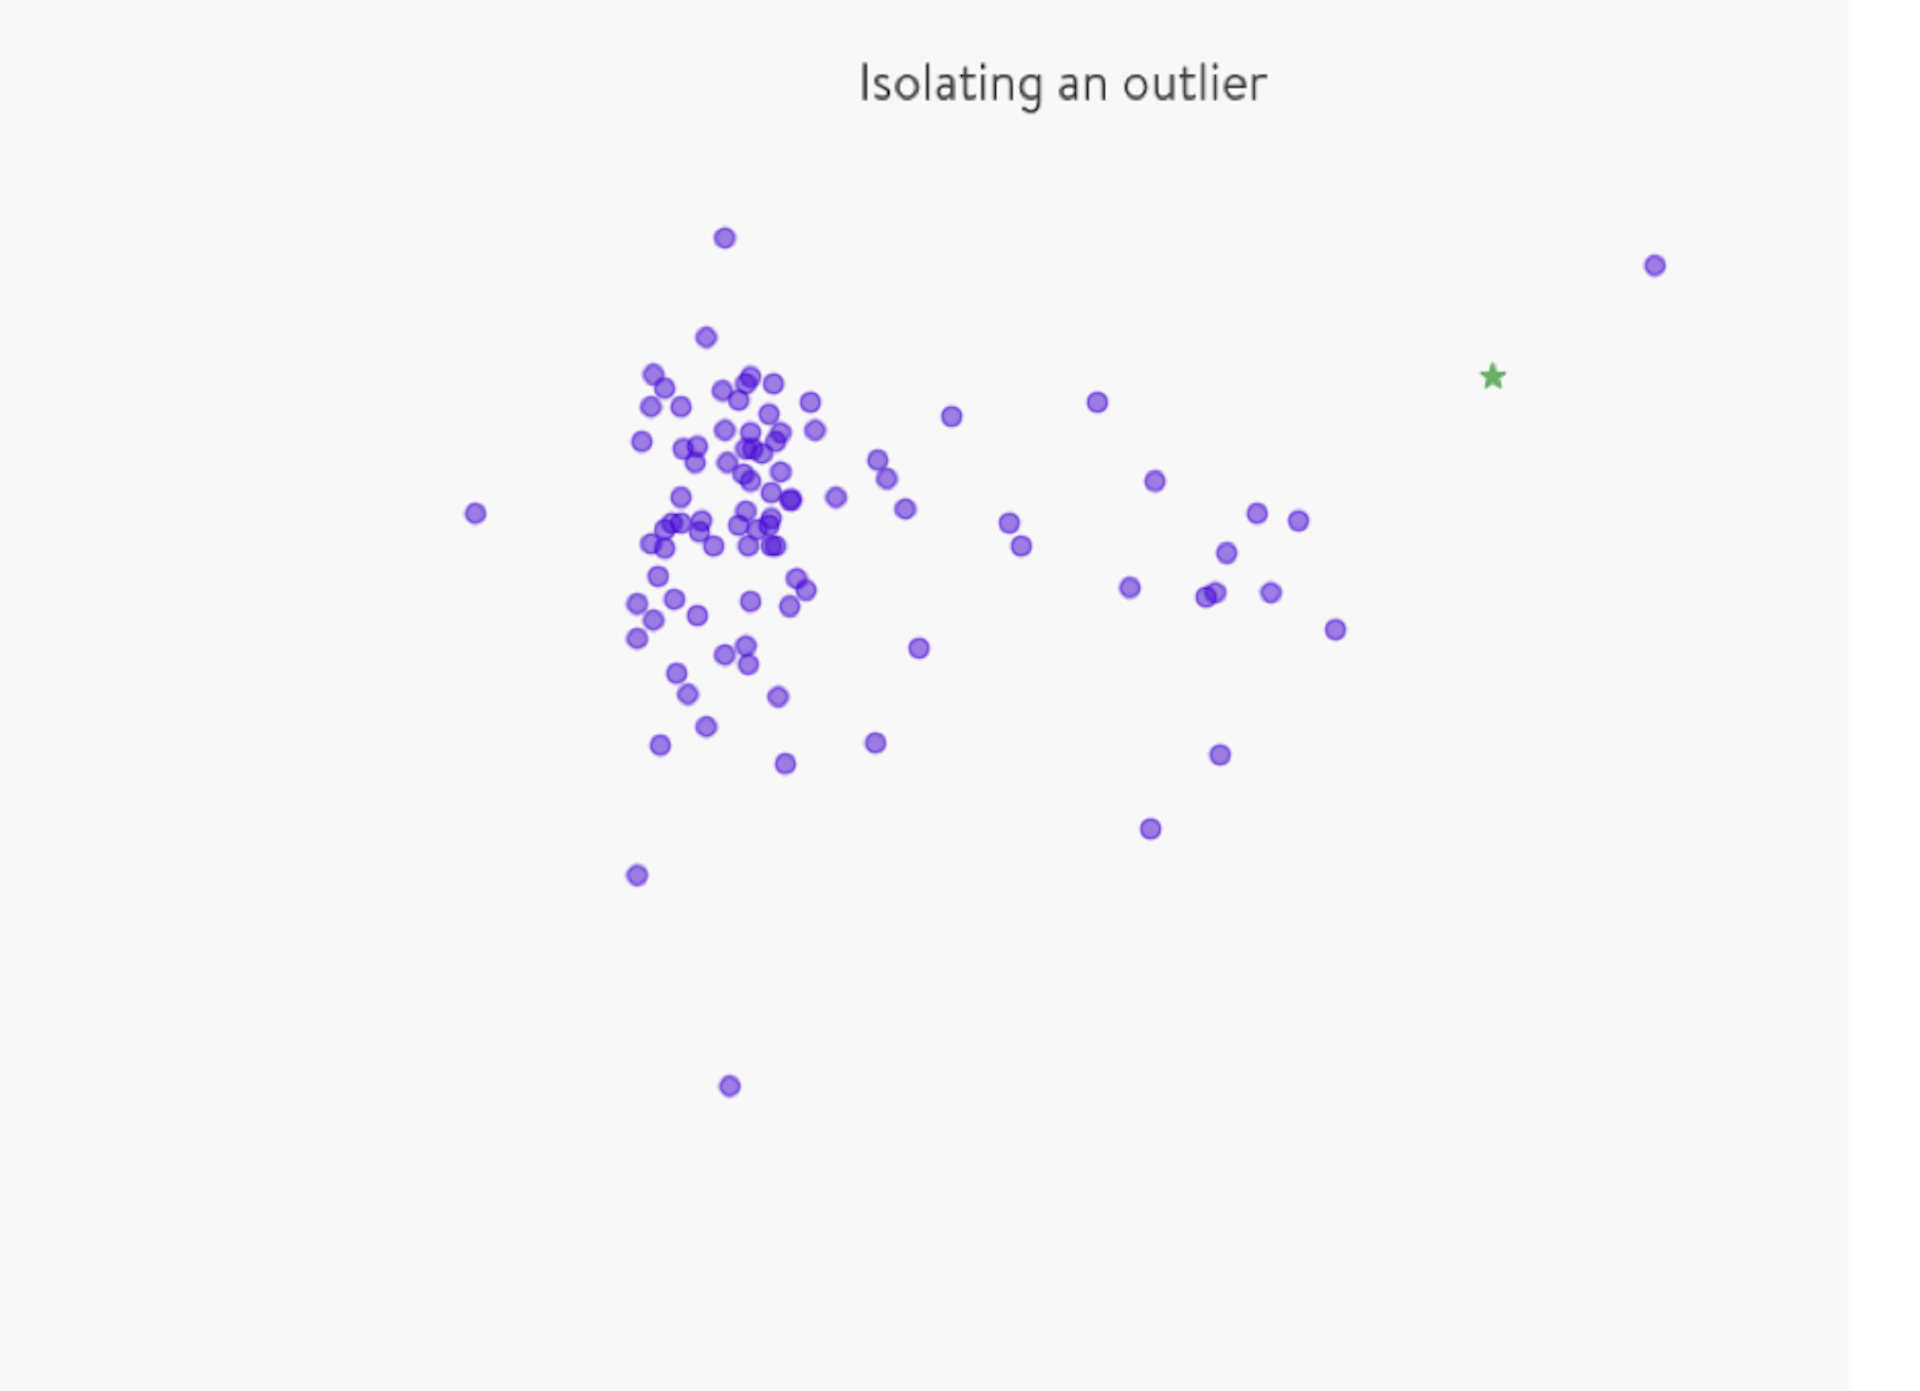 Isolate the outlier